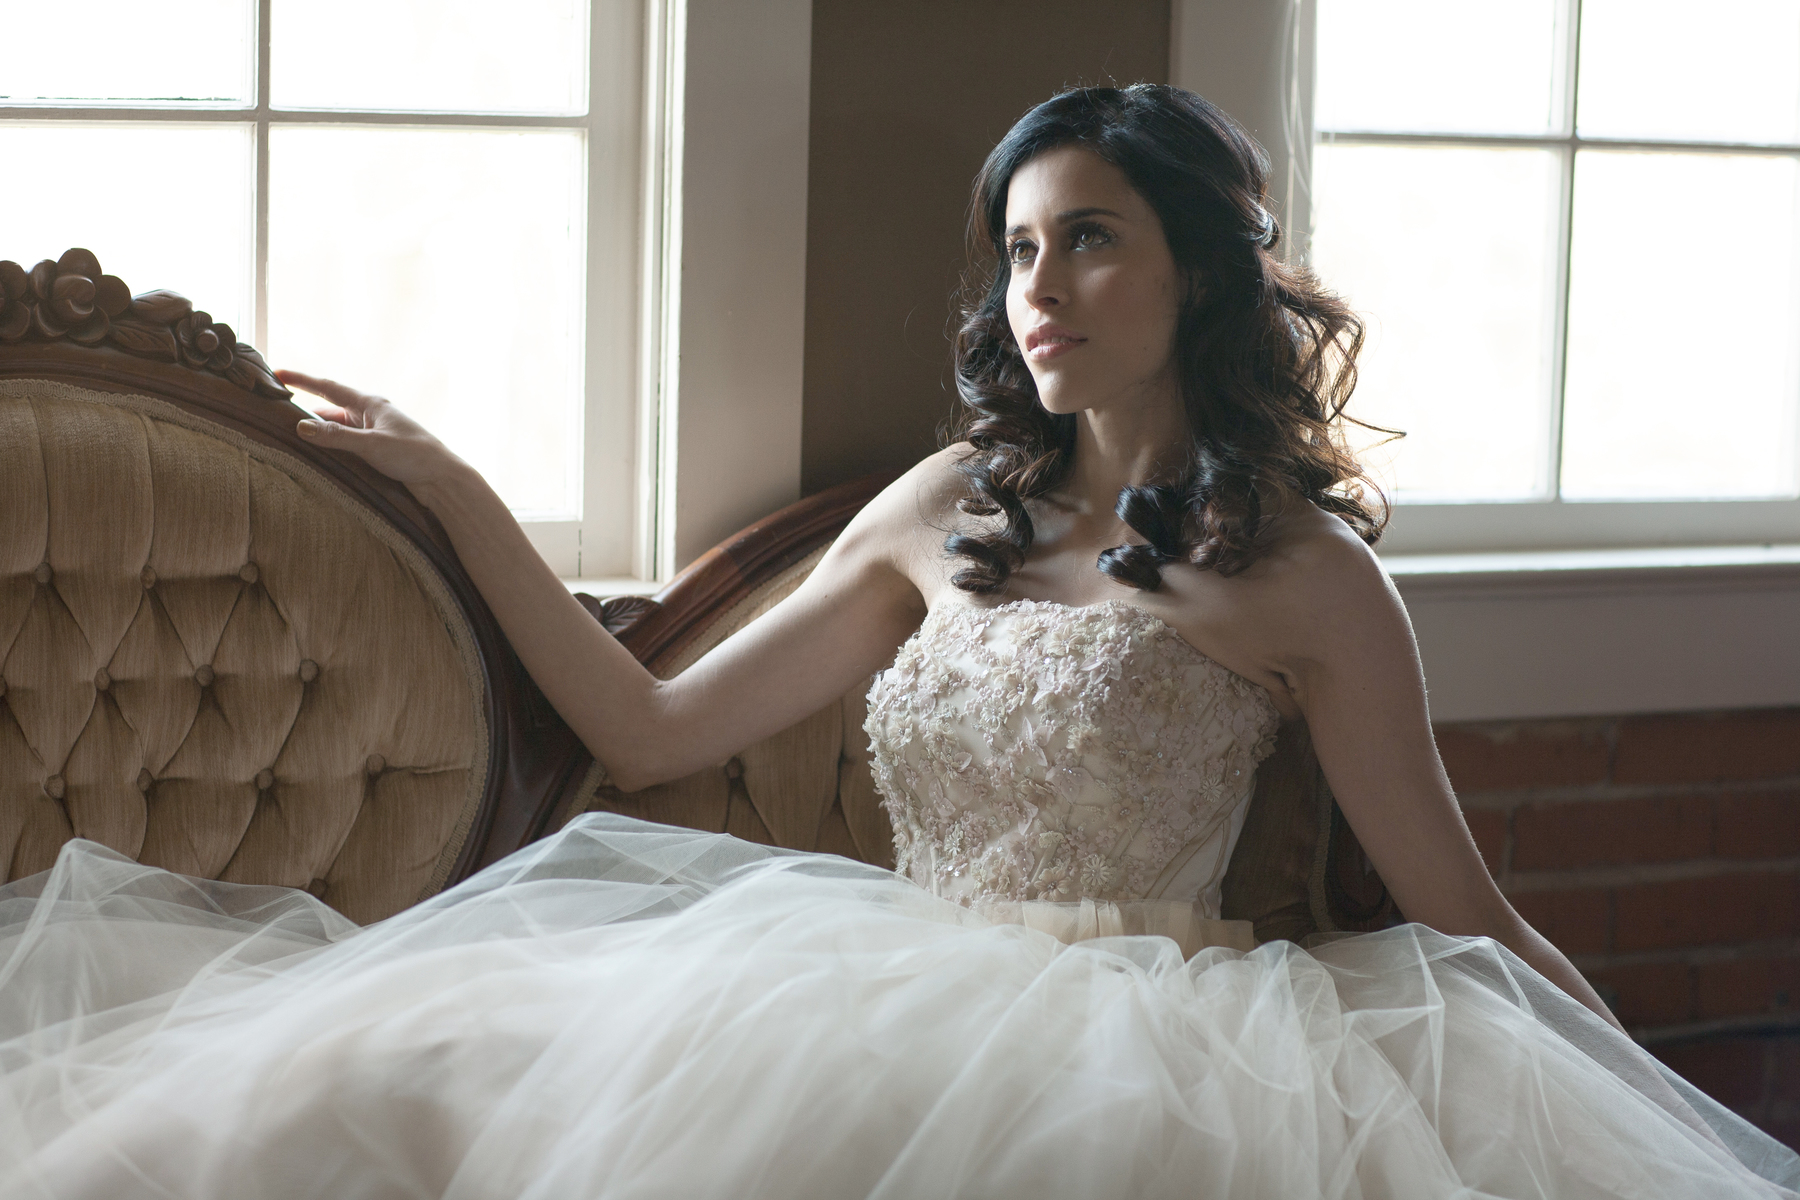 Simply by Tamara Nicole -Wedding Planner
<br />Designer: Luly Yang
<br />Make up/Hair: Yessie Libby
<br />Photography: Aly Medina - La Luz Photography